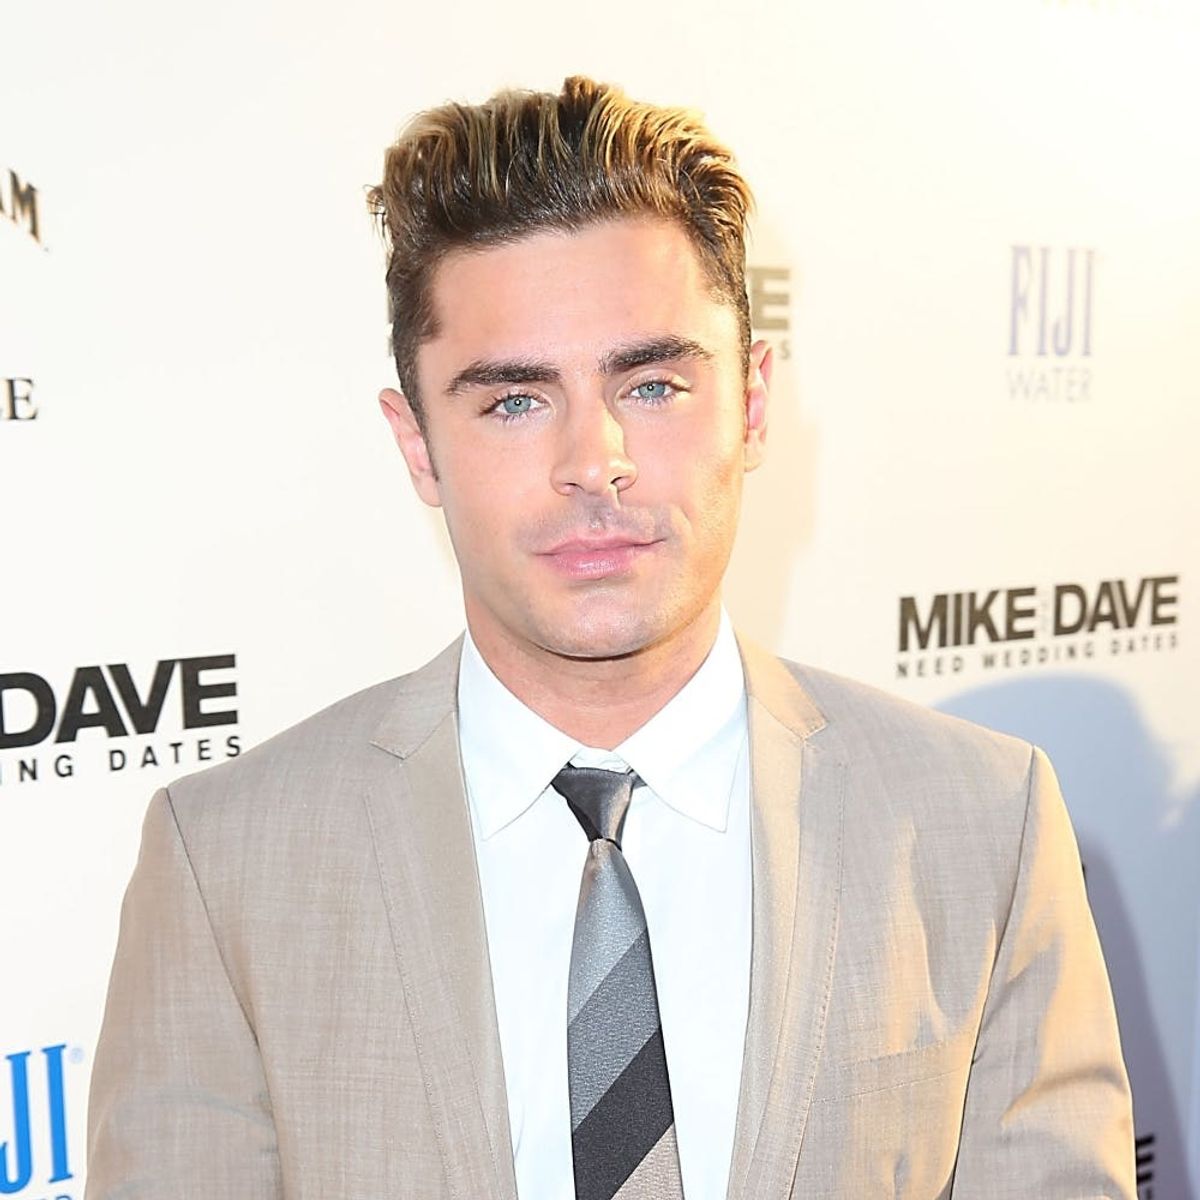 Zac Efron Posted a Sweet Tribute After Losing His Beloved Dog